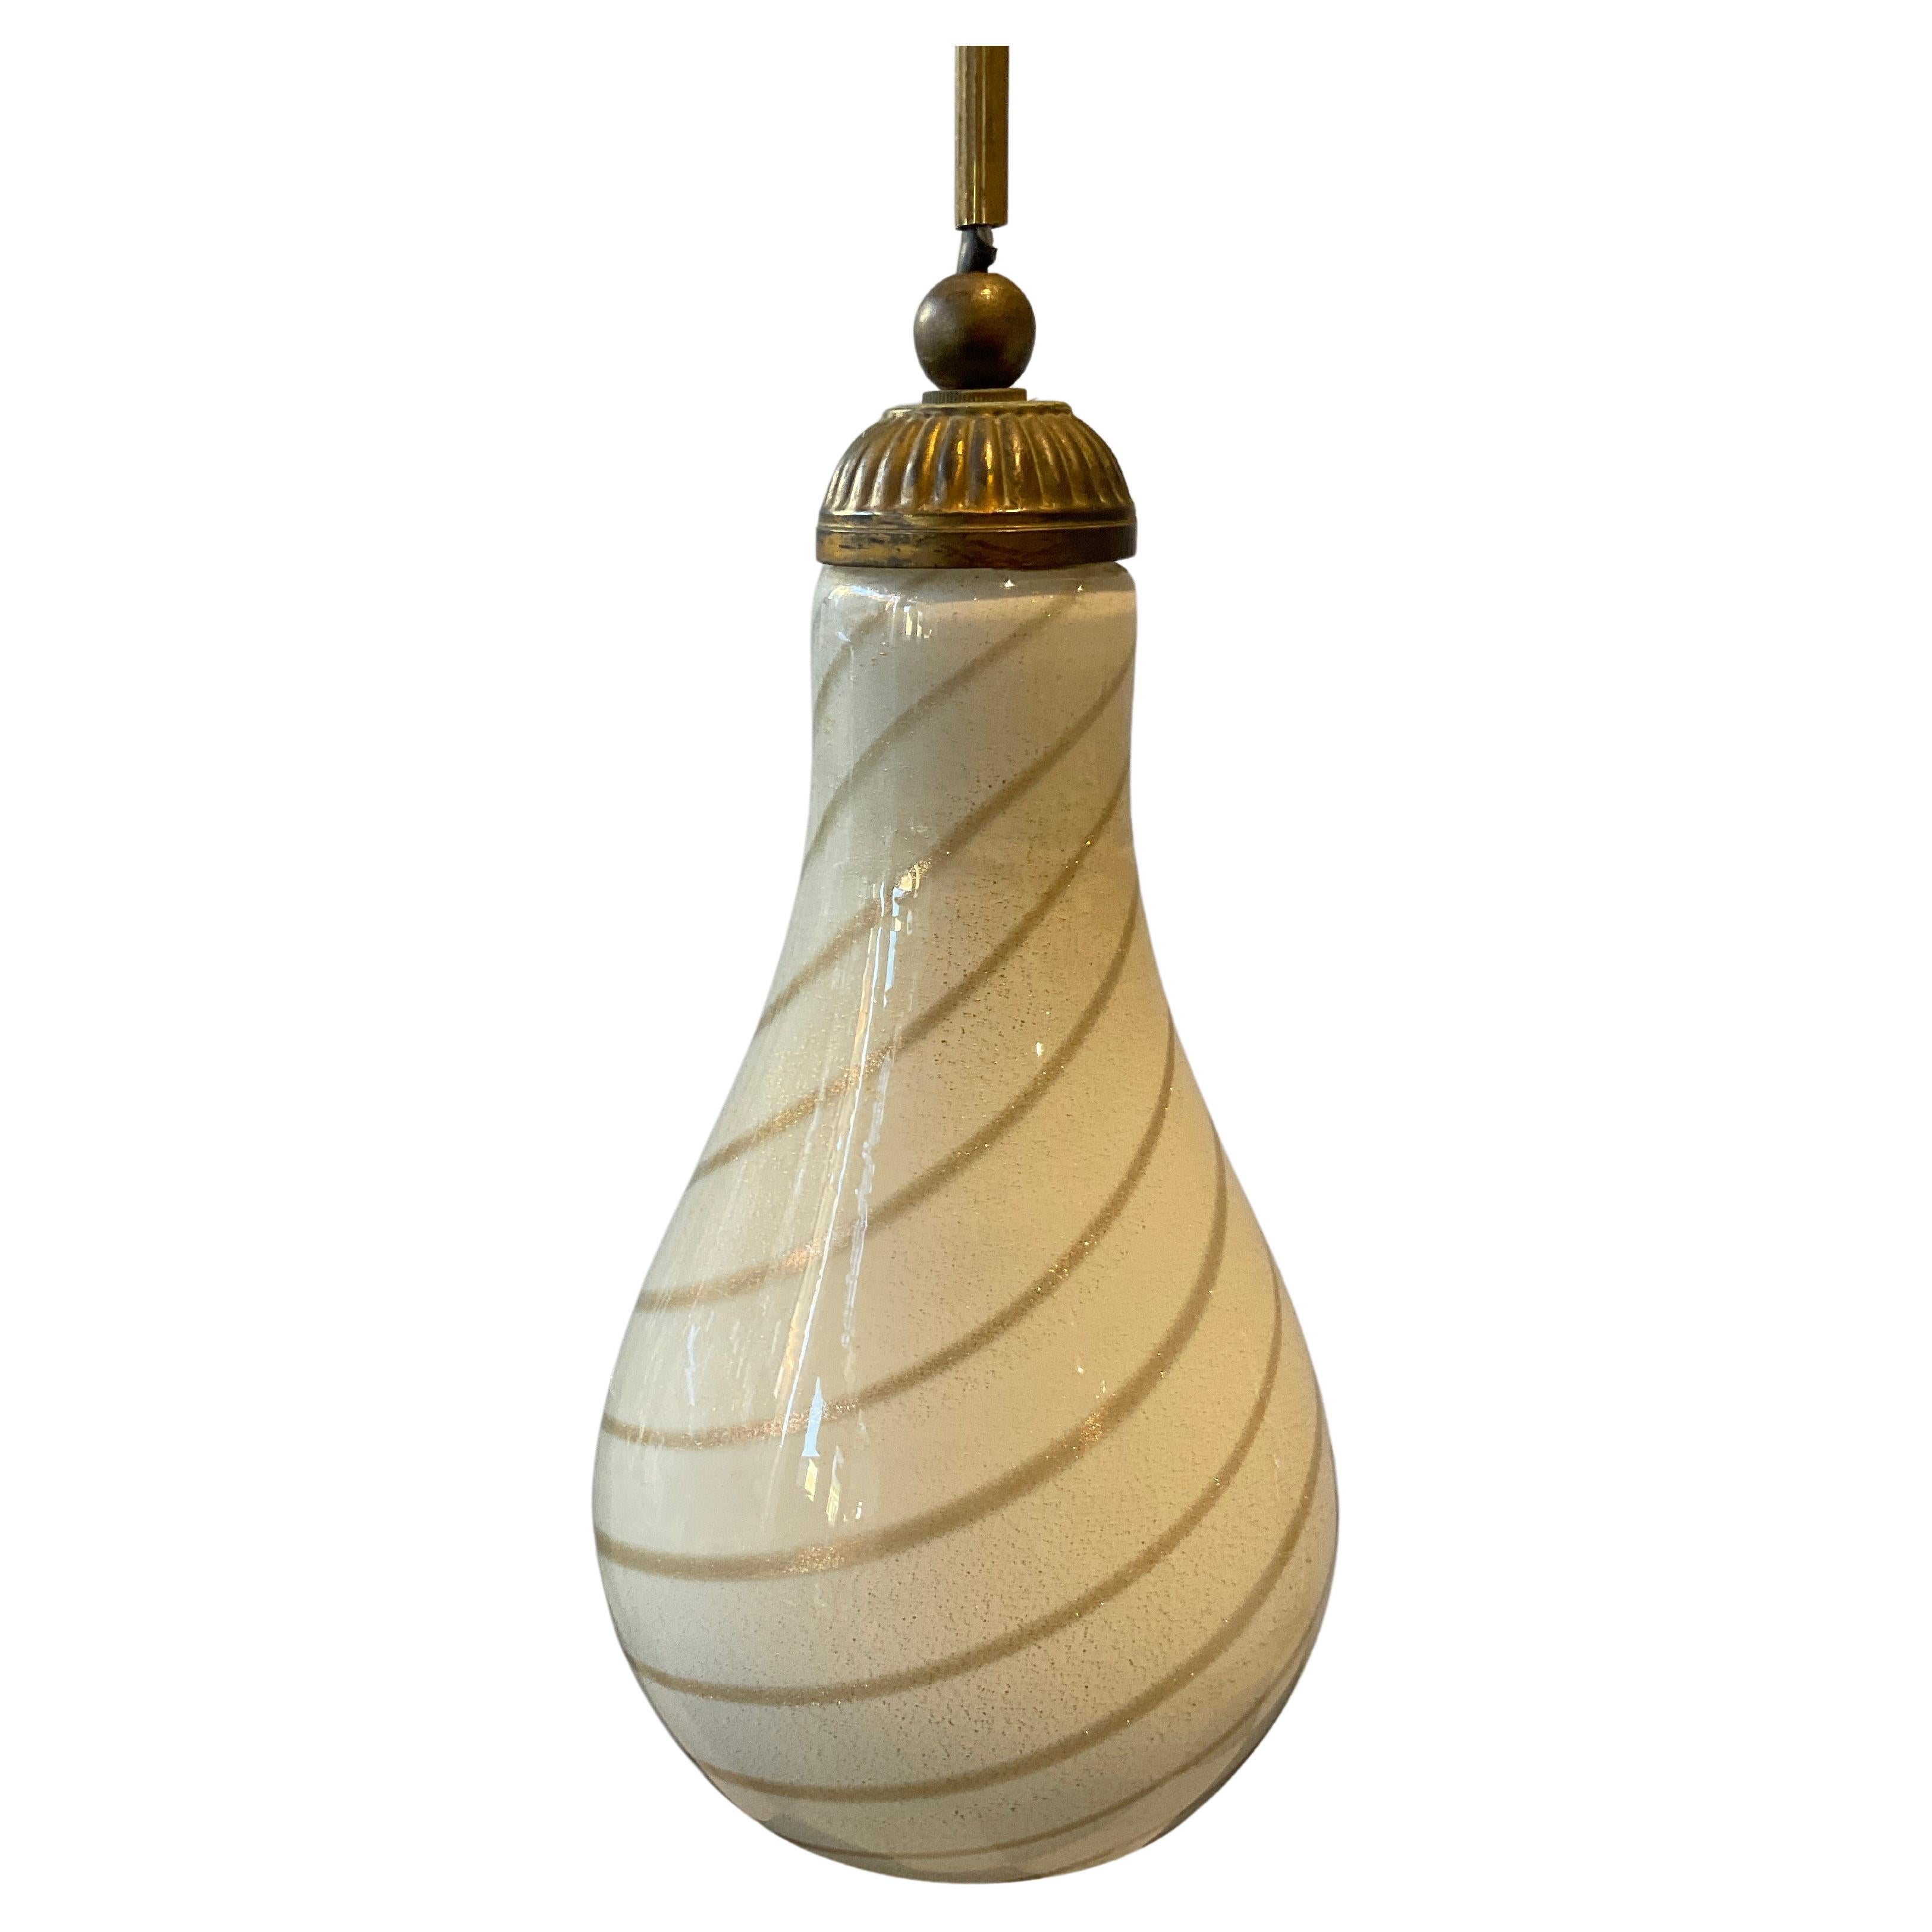 1960s Murano Gold and off White Glass Pendant